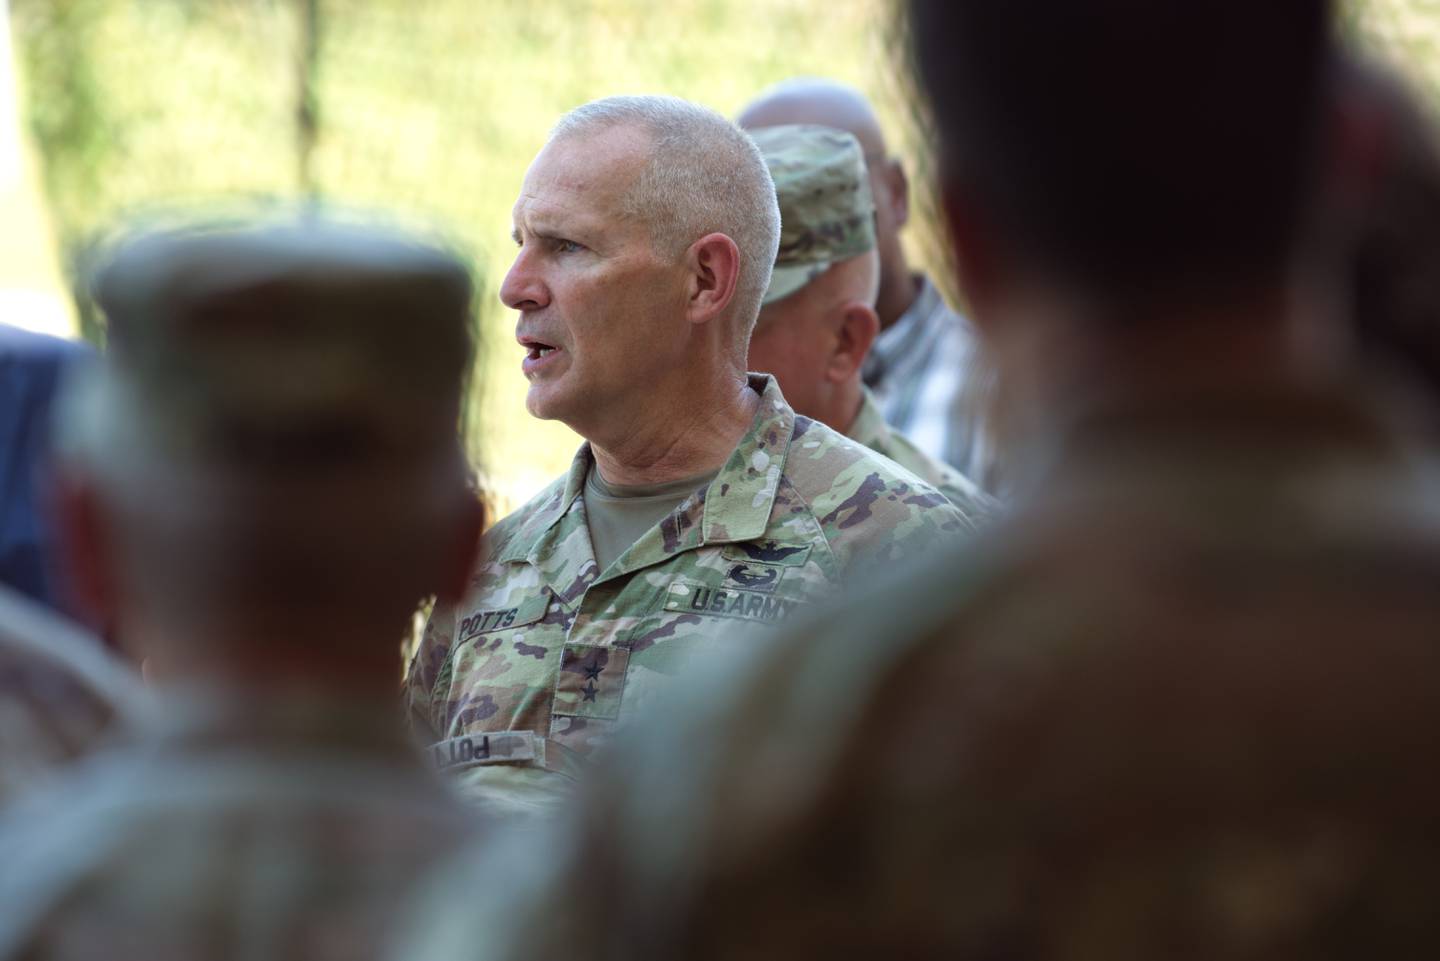 U.S. Army Maj. Gen. Anthony Potts, the program executive officer for command, control and communications-tactical, speaks at an event in Delaware on Aug. 9, 2022.